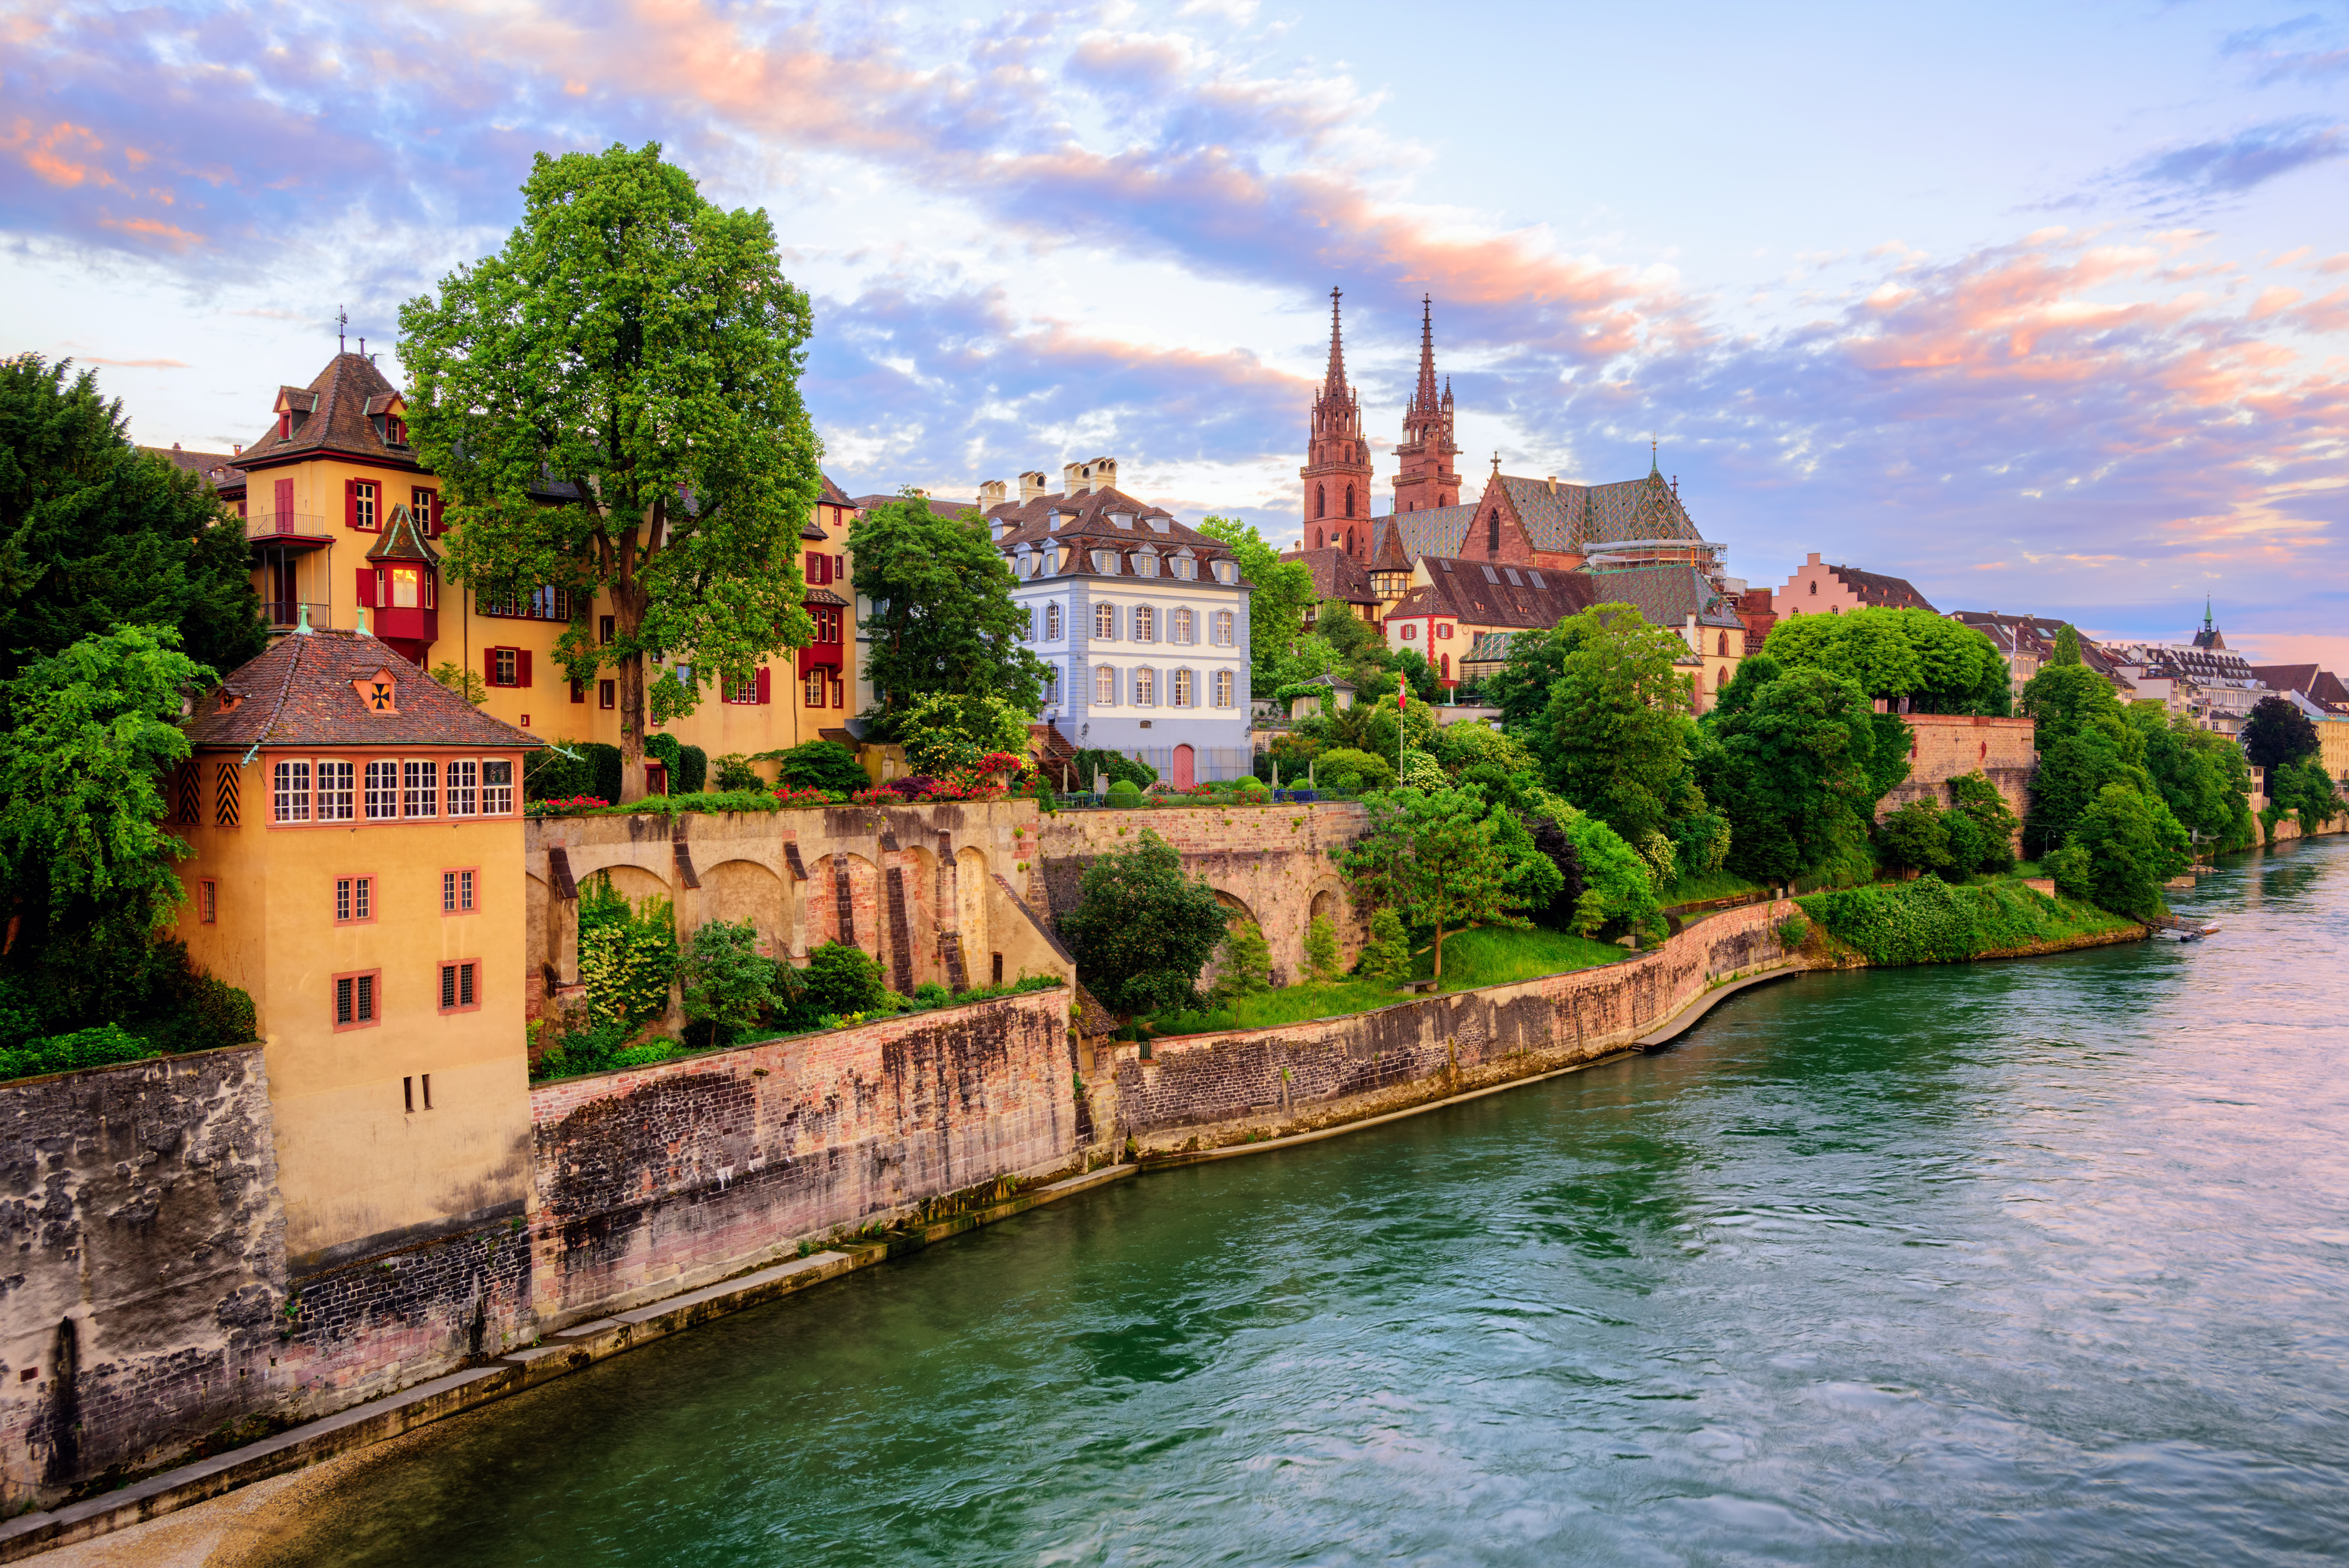 Basel Old Town with Munster cathedral and Rhine, Switzerland